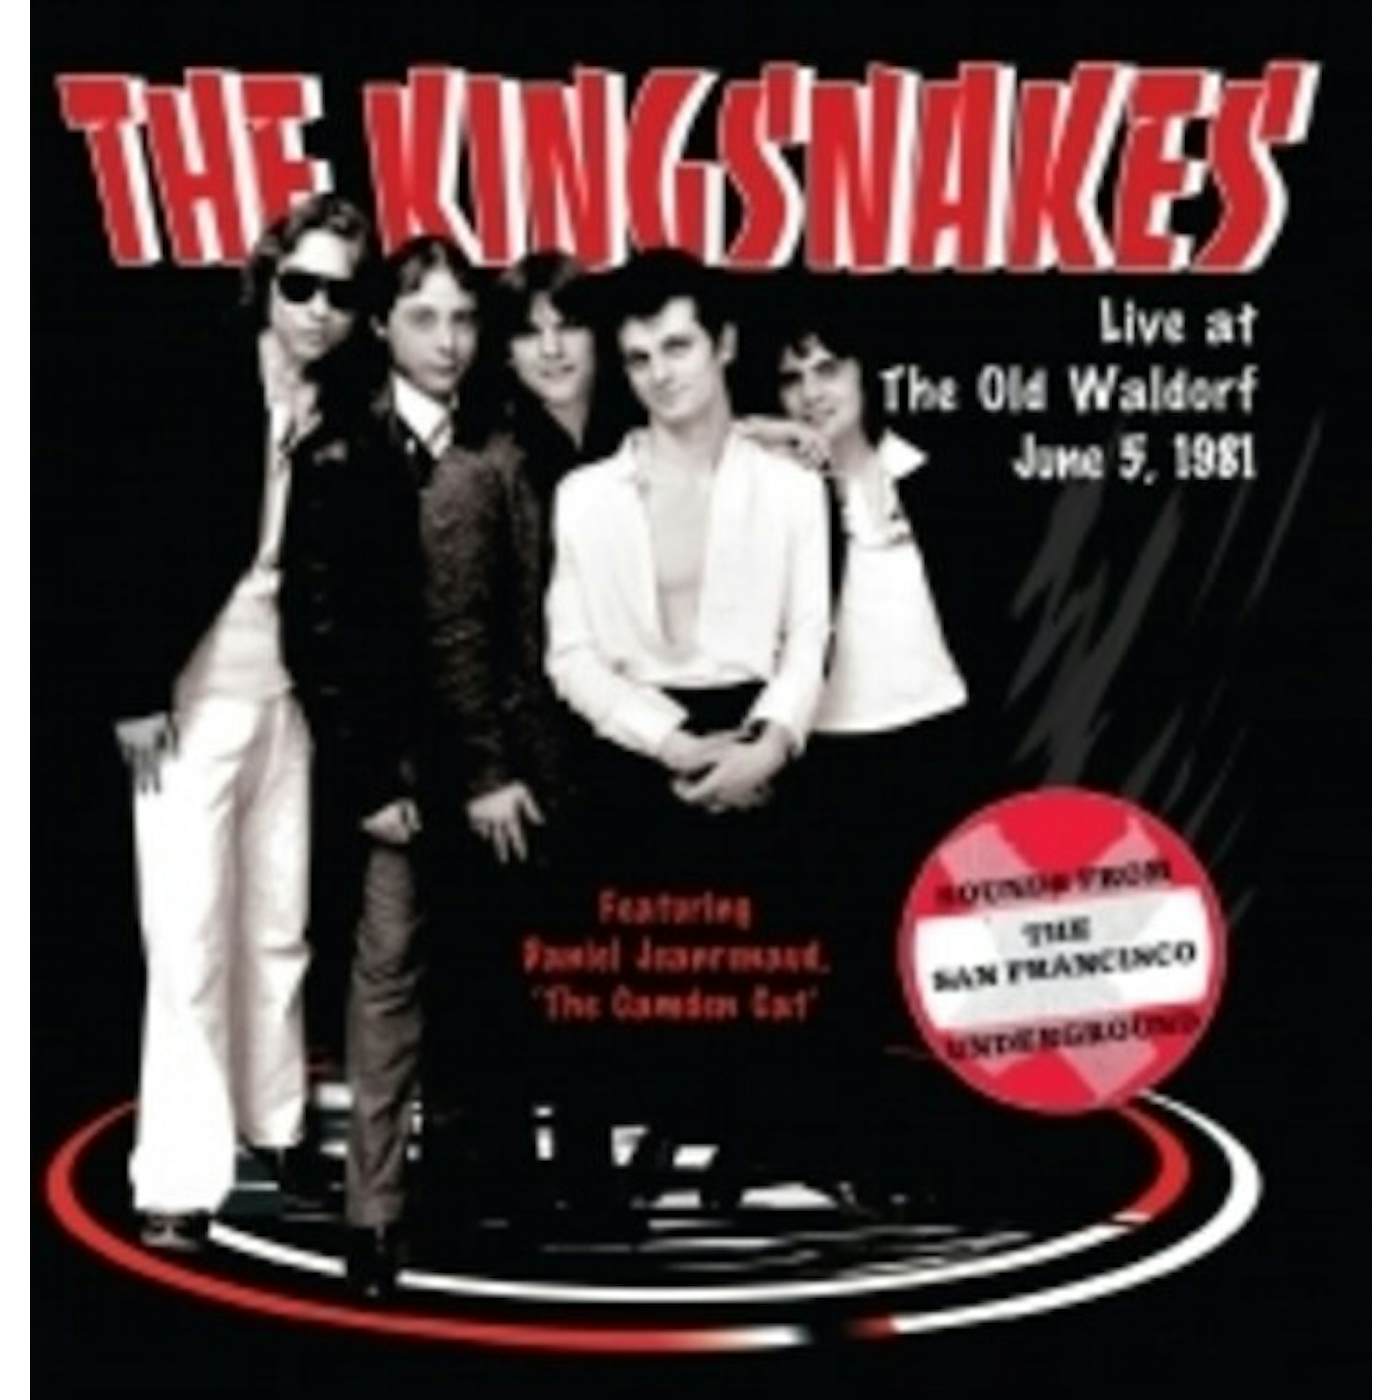 The Kingsnakes LIVE AT THE OLD WALDORF JUNE 5, 1981 CD